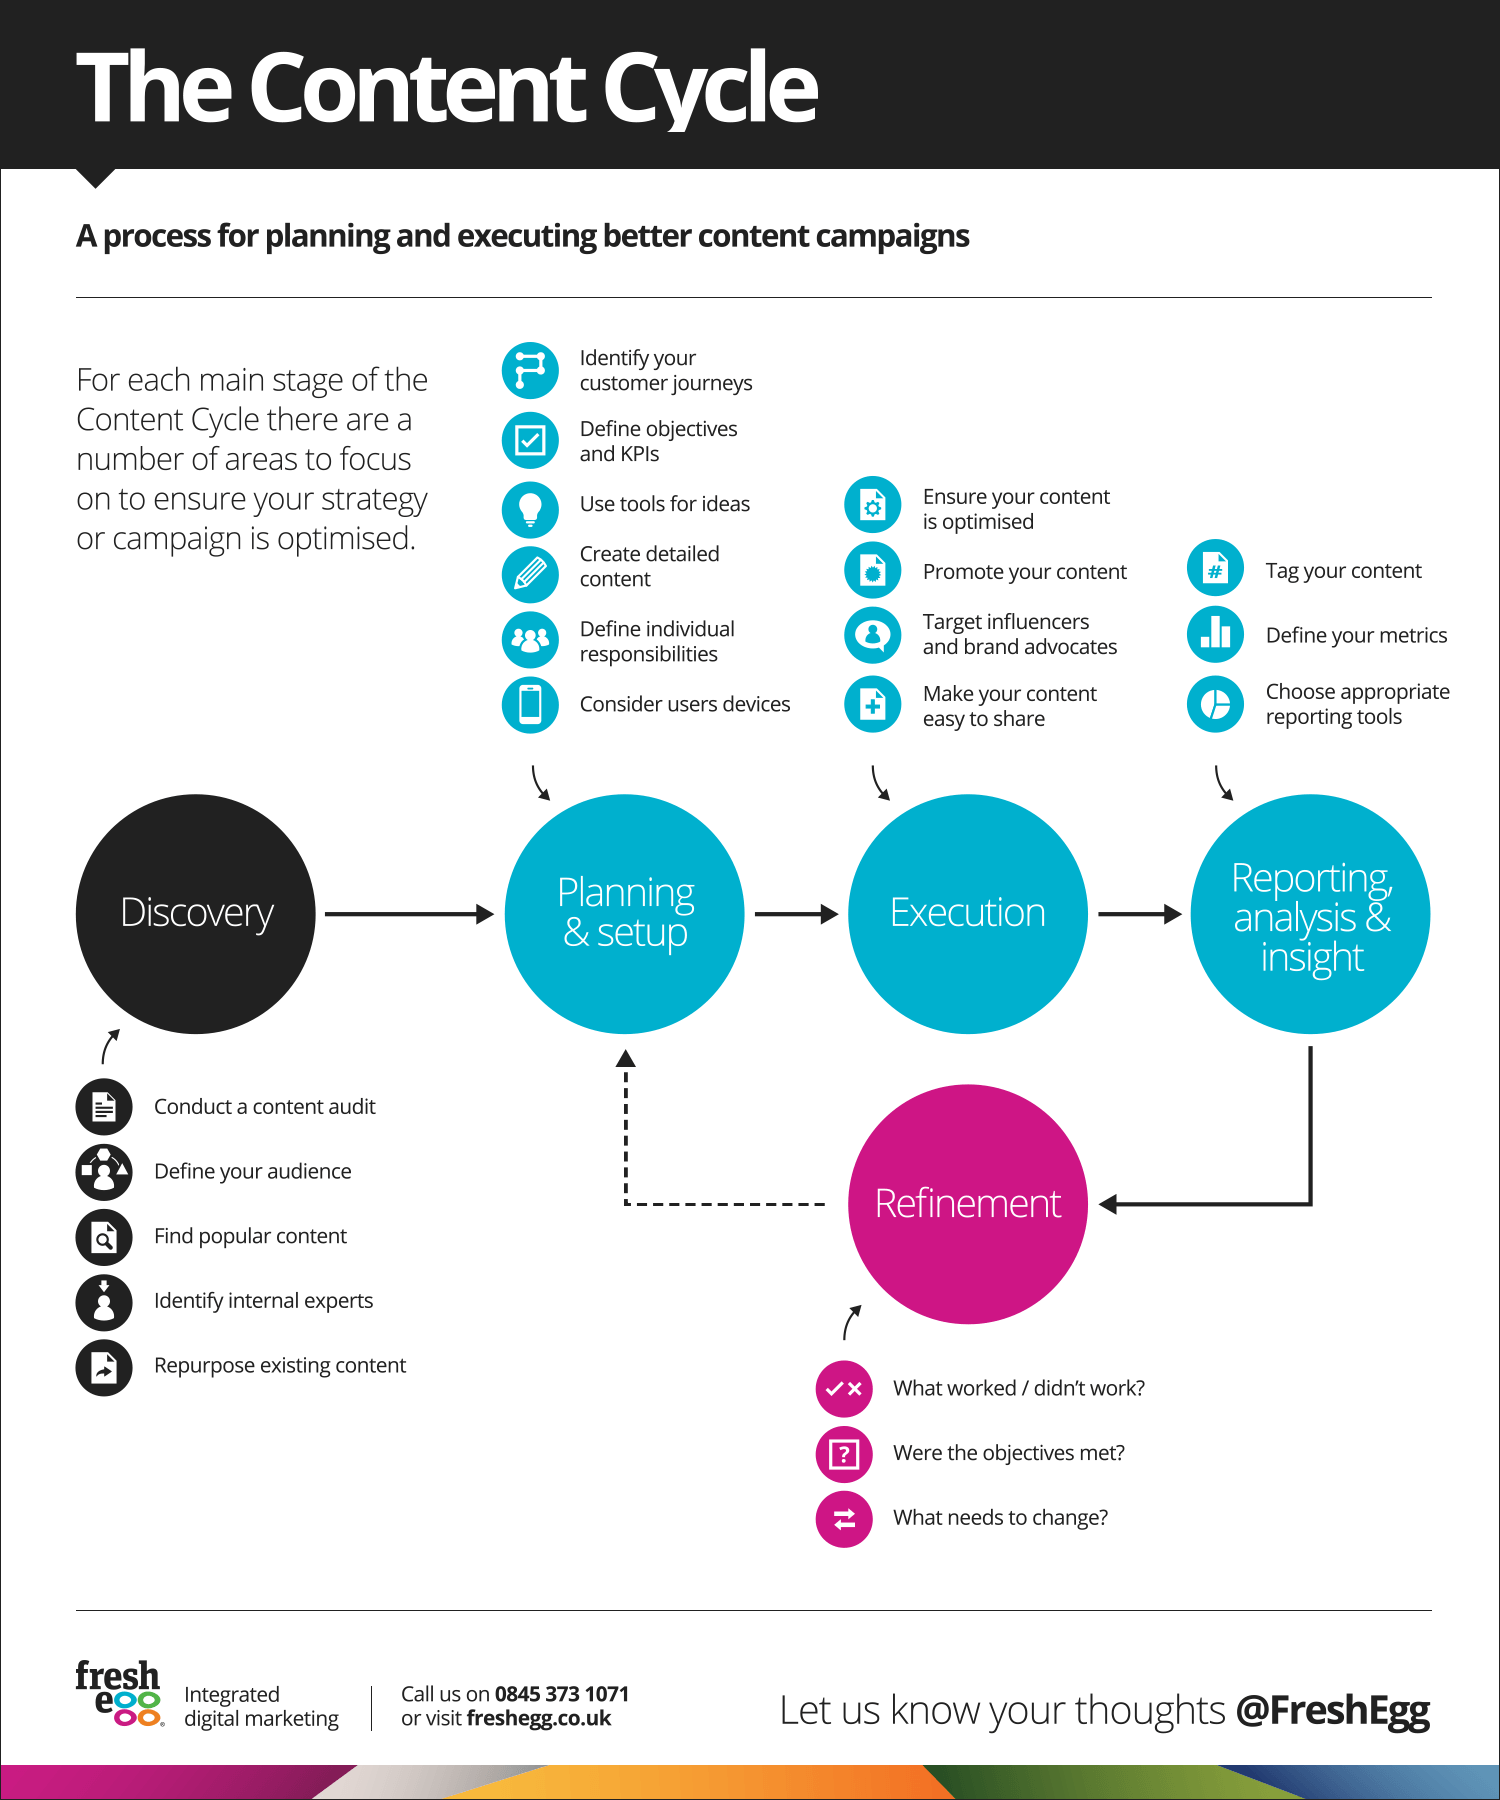 The Content Cycle visual showing how to optimise content campaigns